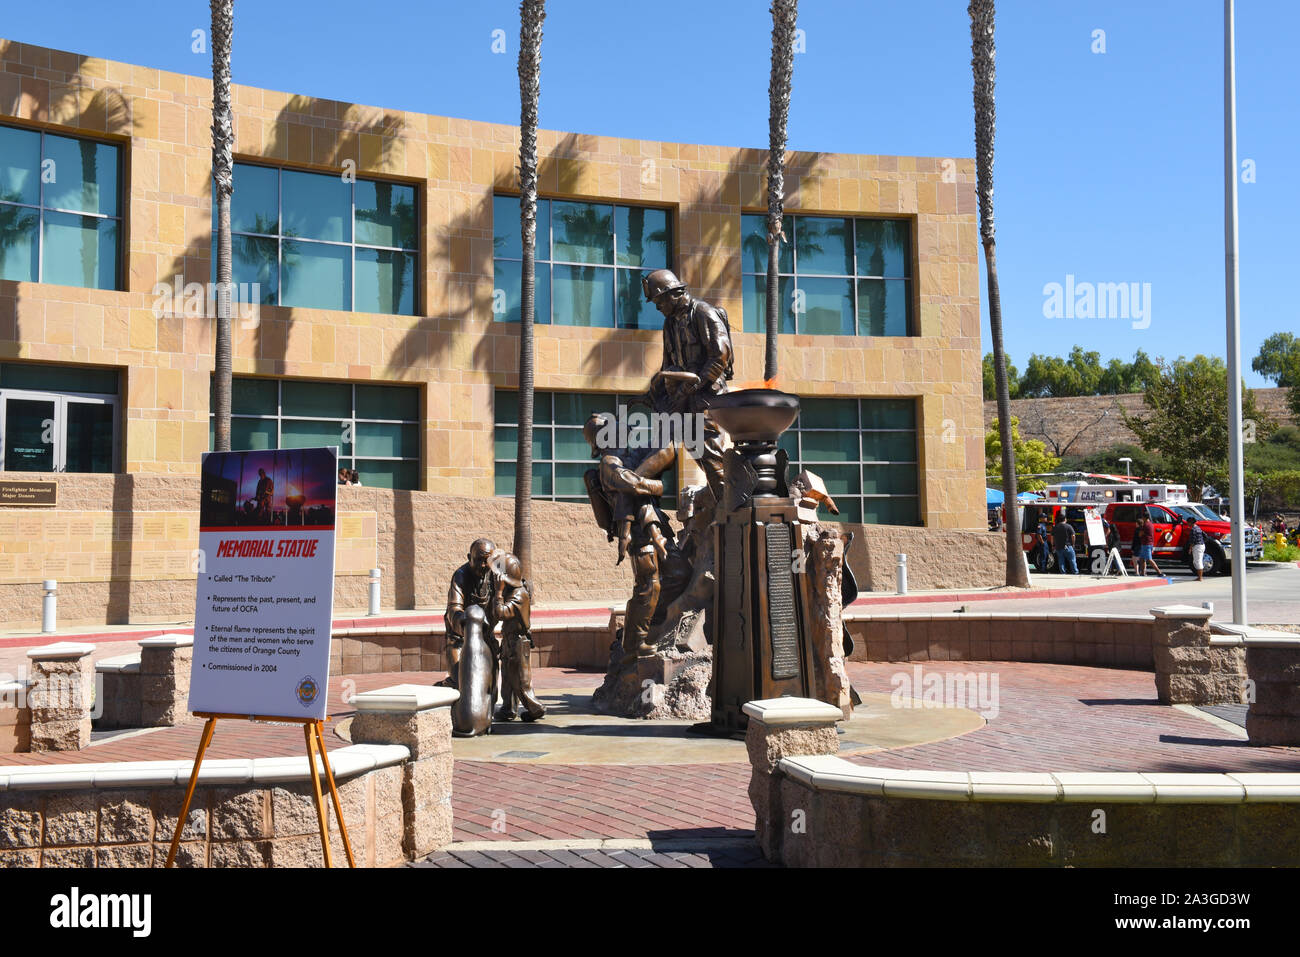 IRVINE, CALIFORNIA - 5 OCT 2019: The Tribute, a Memorial Statue at the Orange County Fire Authority Headquarters Stock Photo